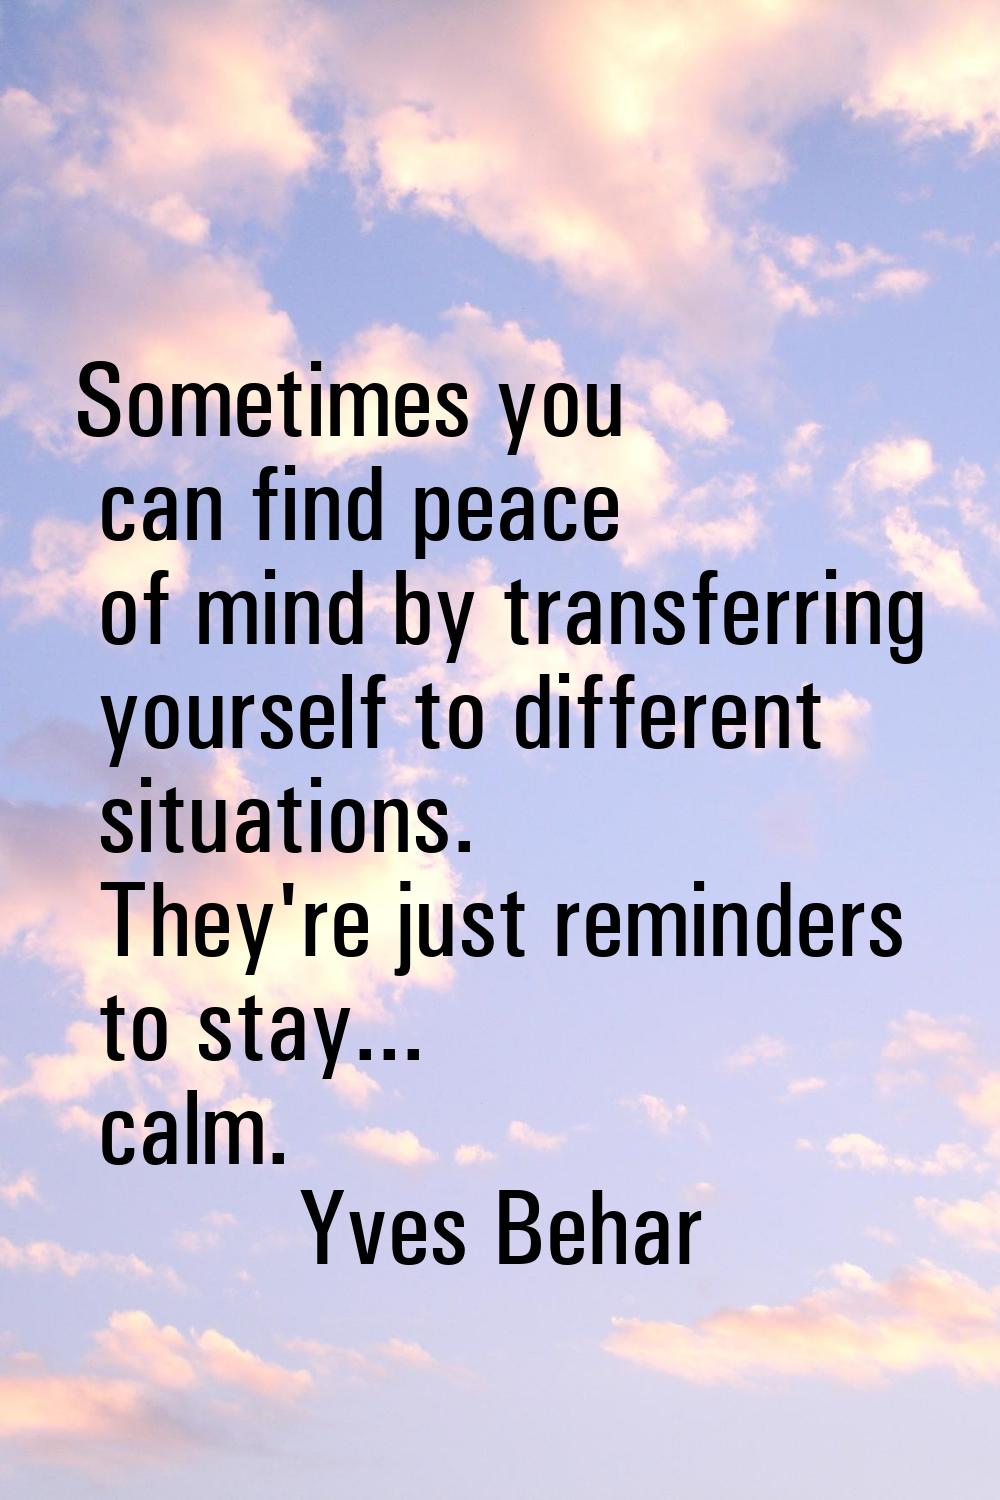 Sometimes you can find peace of mind by transferring yourself to different situations. They're just